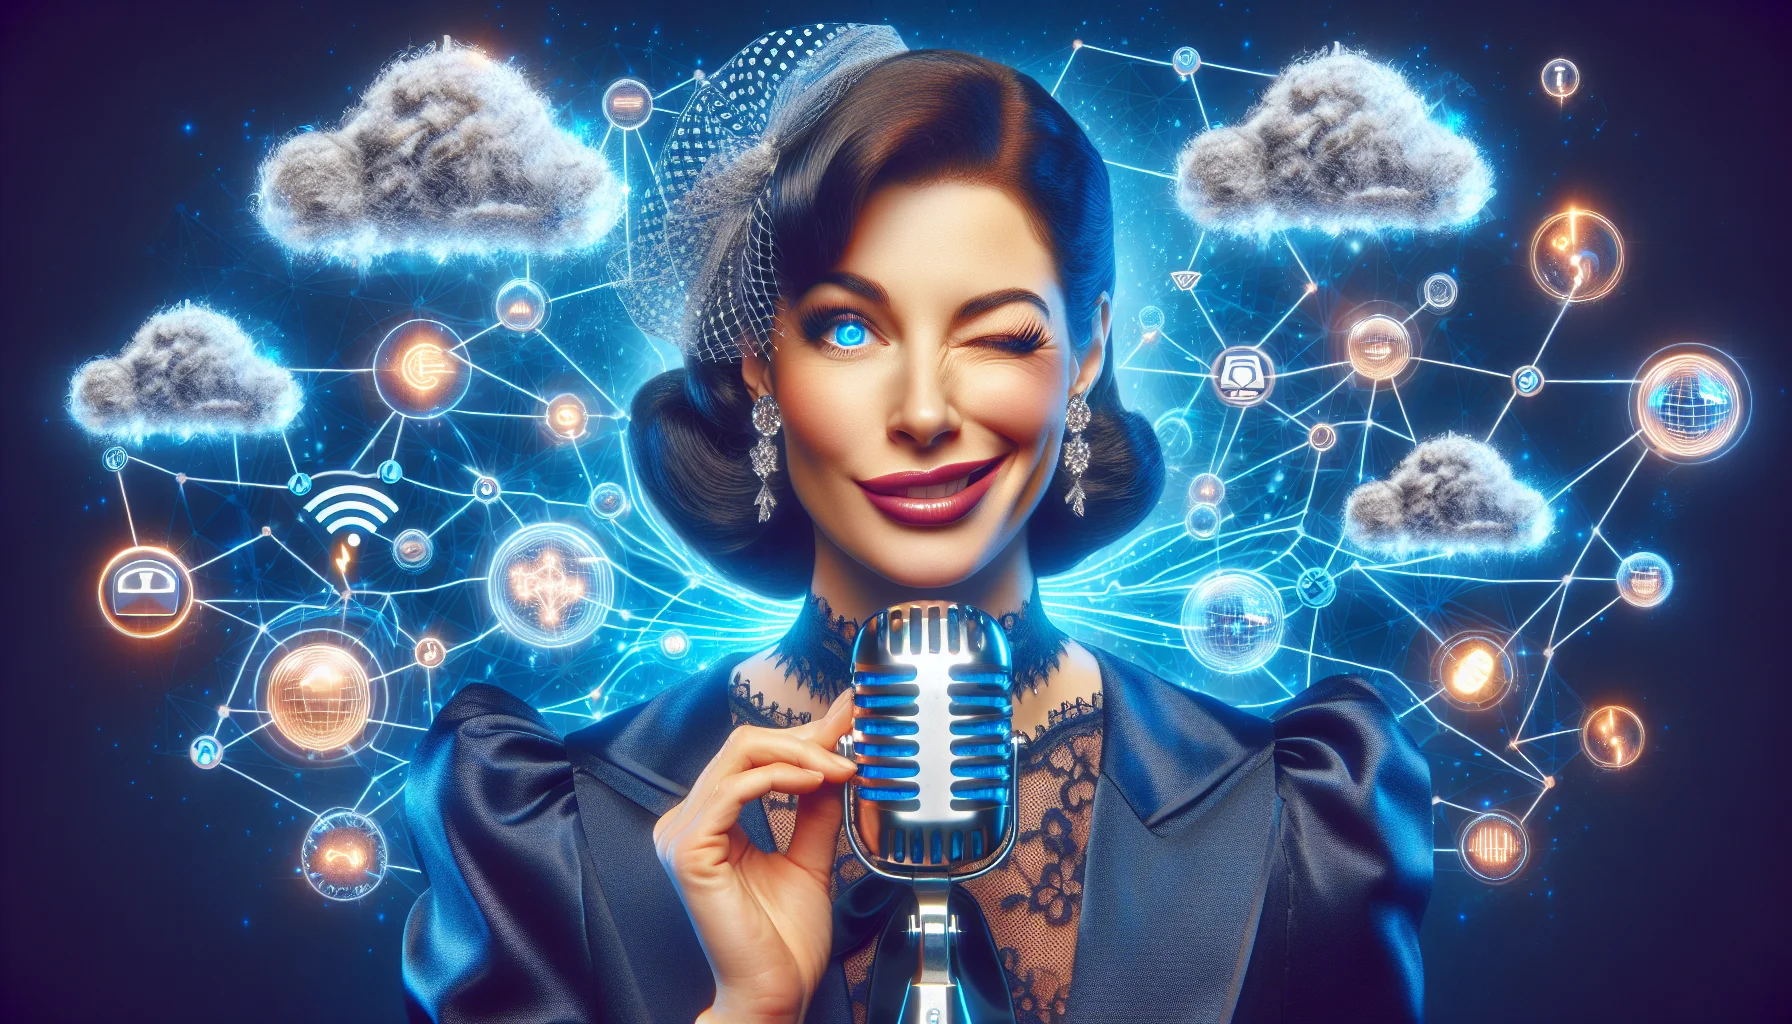 Create a realistic image portraying a woman with elegant features and a charming smile, not based on any real person, in a humorous scenario promoting web hosting. She's surrounded by visual metaphors for the internet, such as cloud symbols, connected nodes, and streams of data, all shimmering in electric blue light. She's holding a gigantic, vintage microphone as if in a classic radio broadcast situation. There's a comical, oversized 'ON AIR' sign behind her, while she is blinking an eye and making a devilishly smart sales pitch.